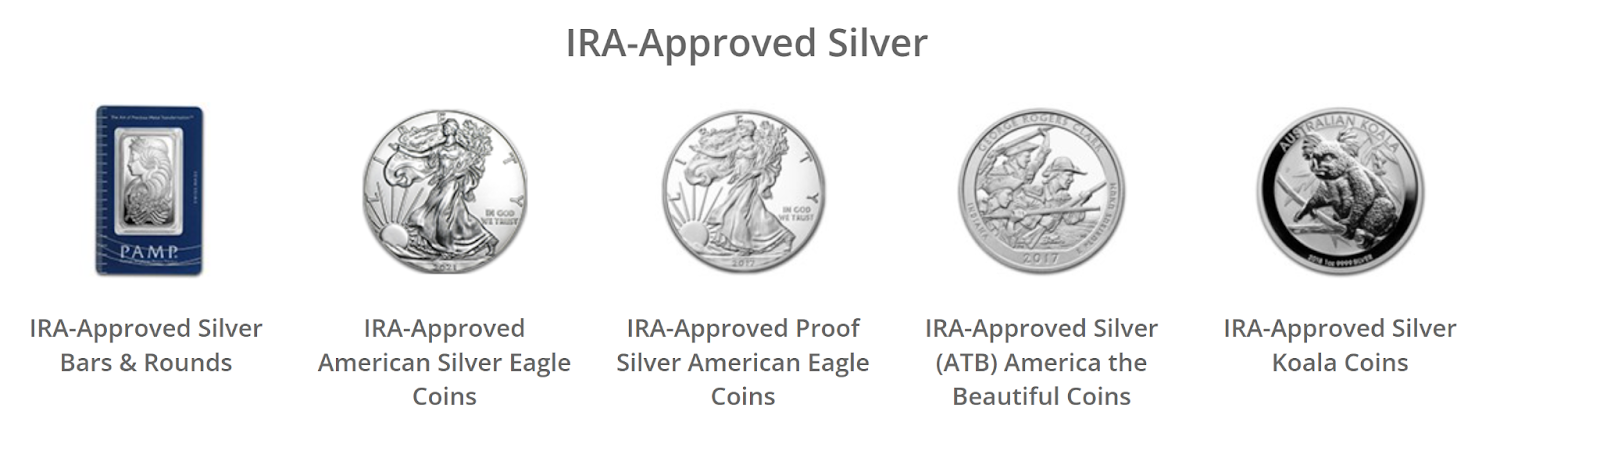 IRA Approved Silver Products by American Precious Metals Exchange